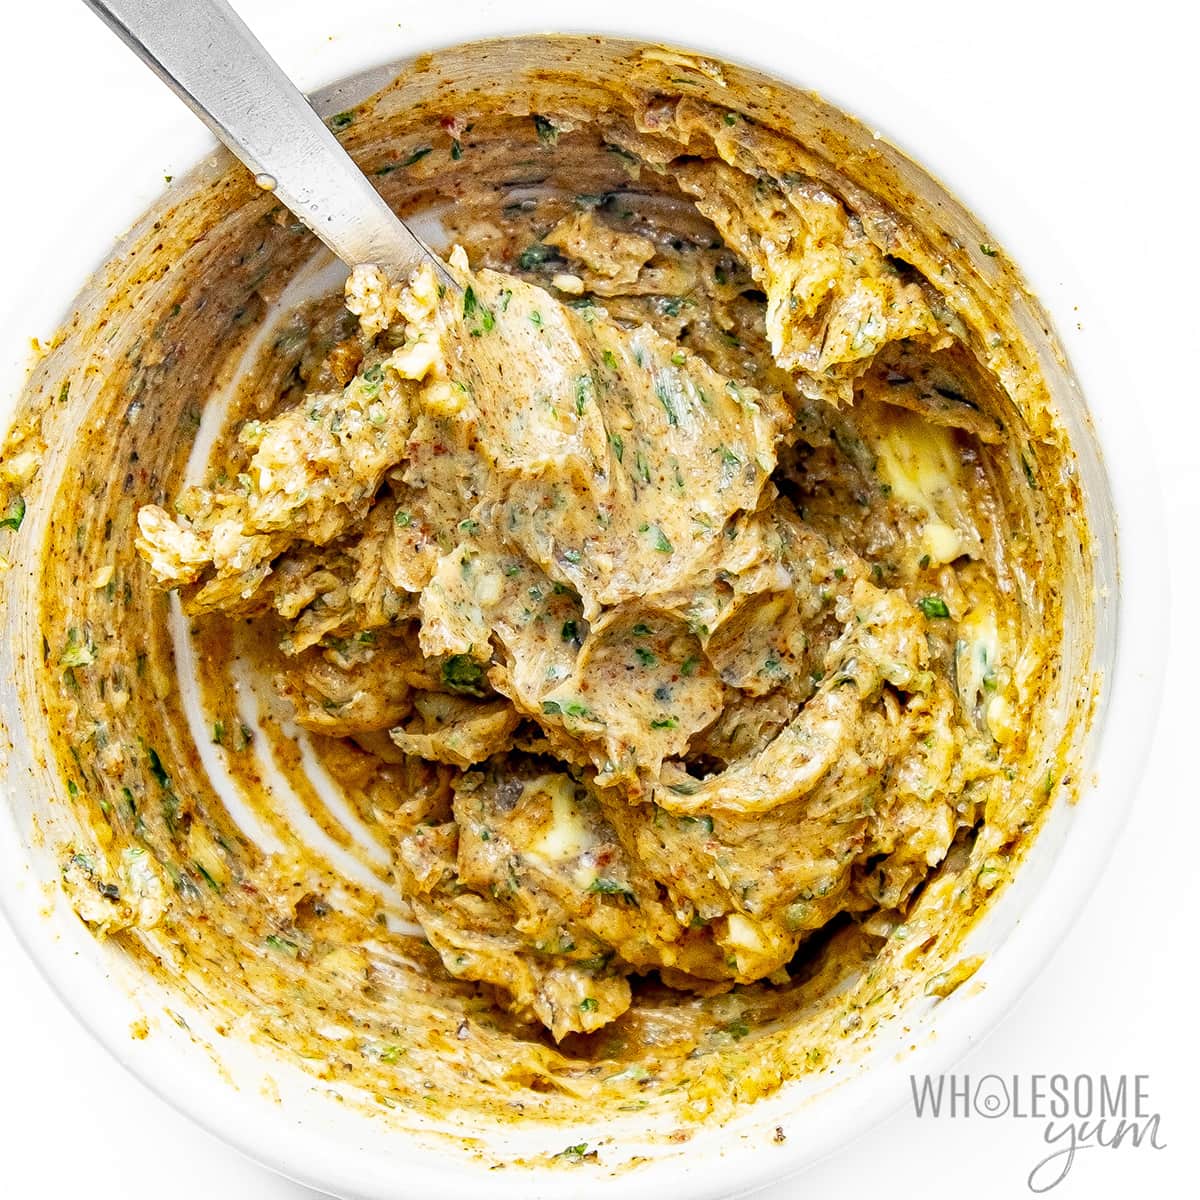 Herb butter mixture in a bowl.